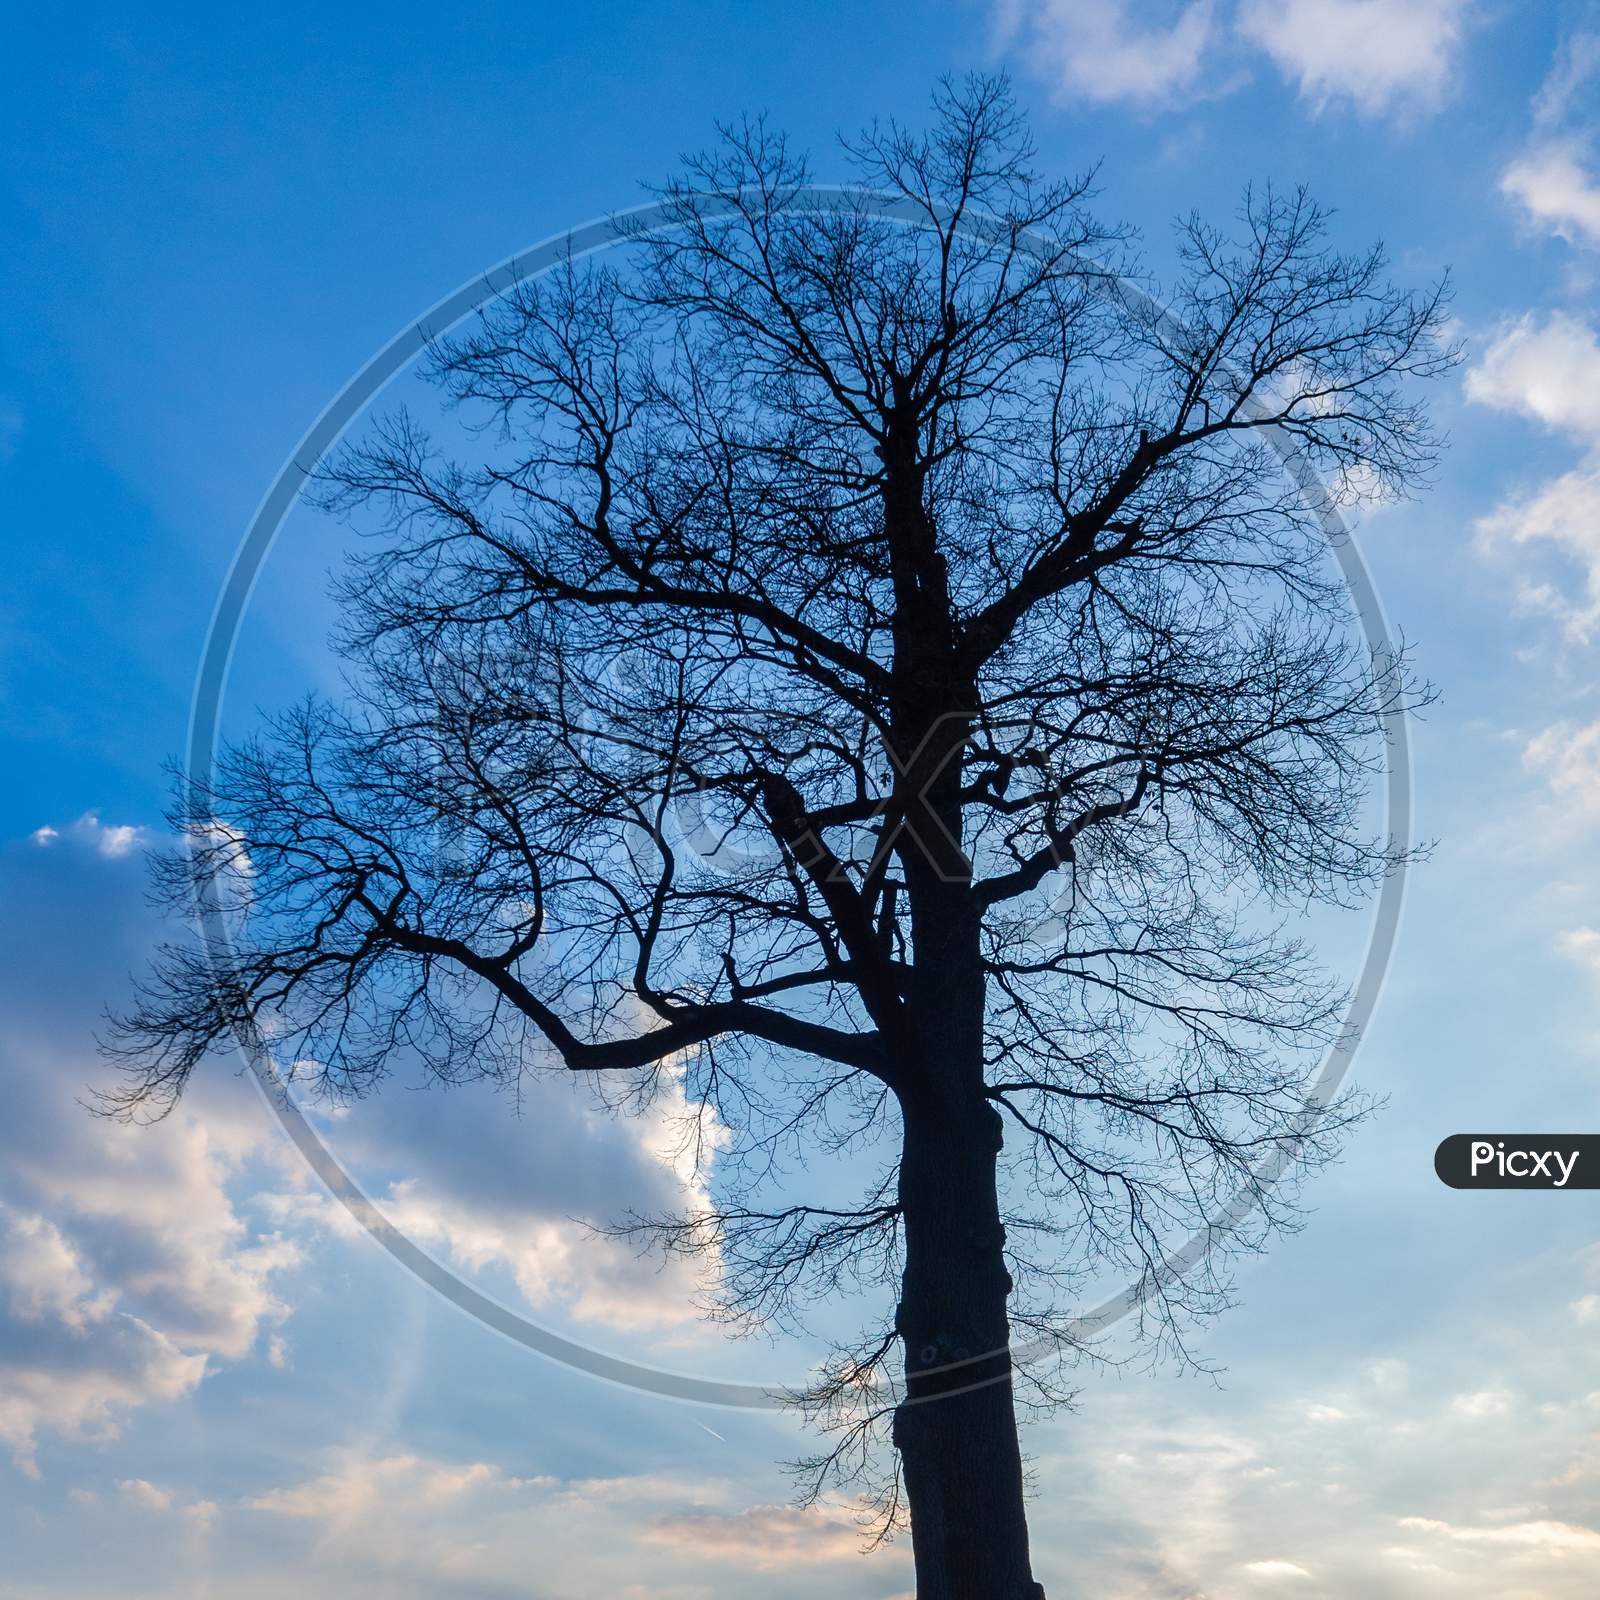 Dark Silhouette Of Single Large Tree Against Blue Sky With White Clouds.